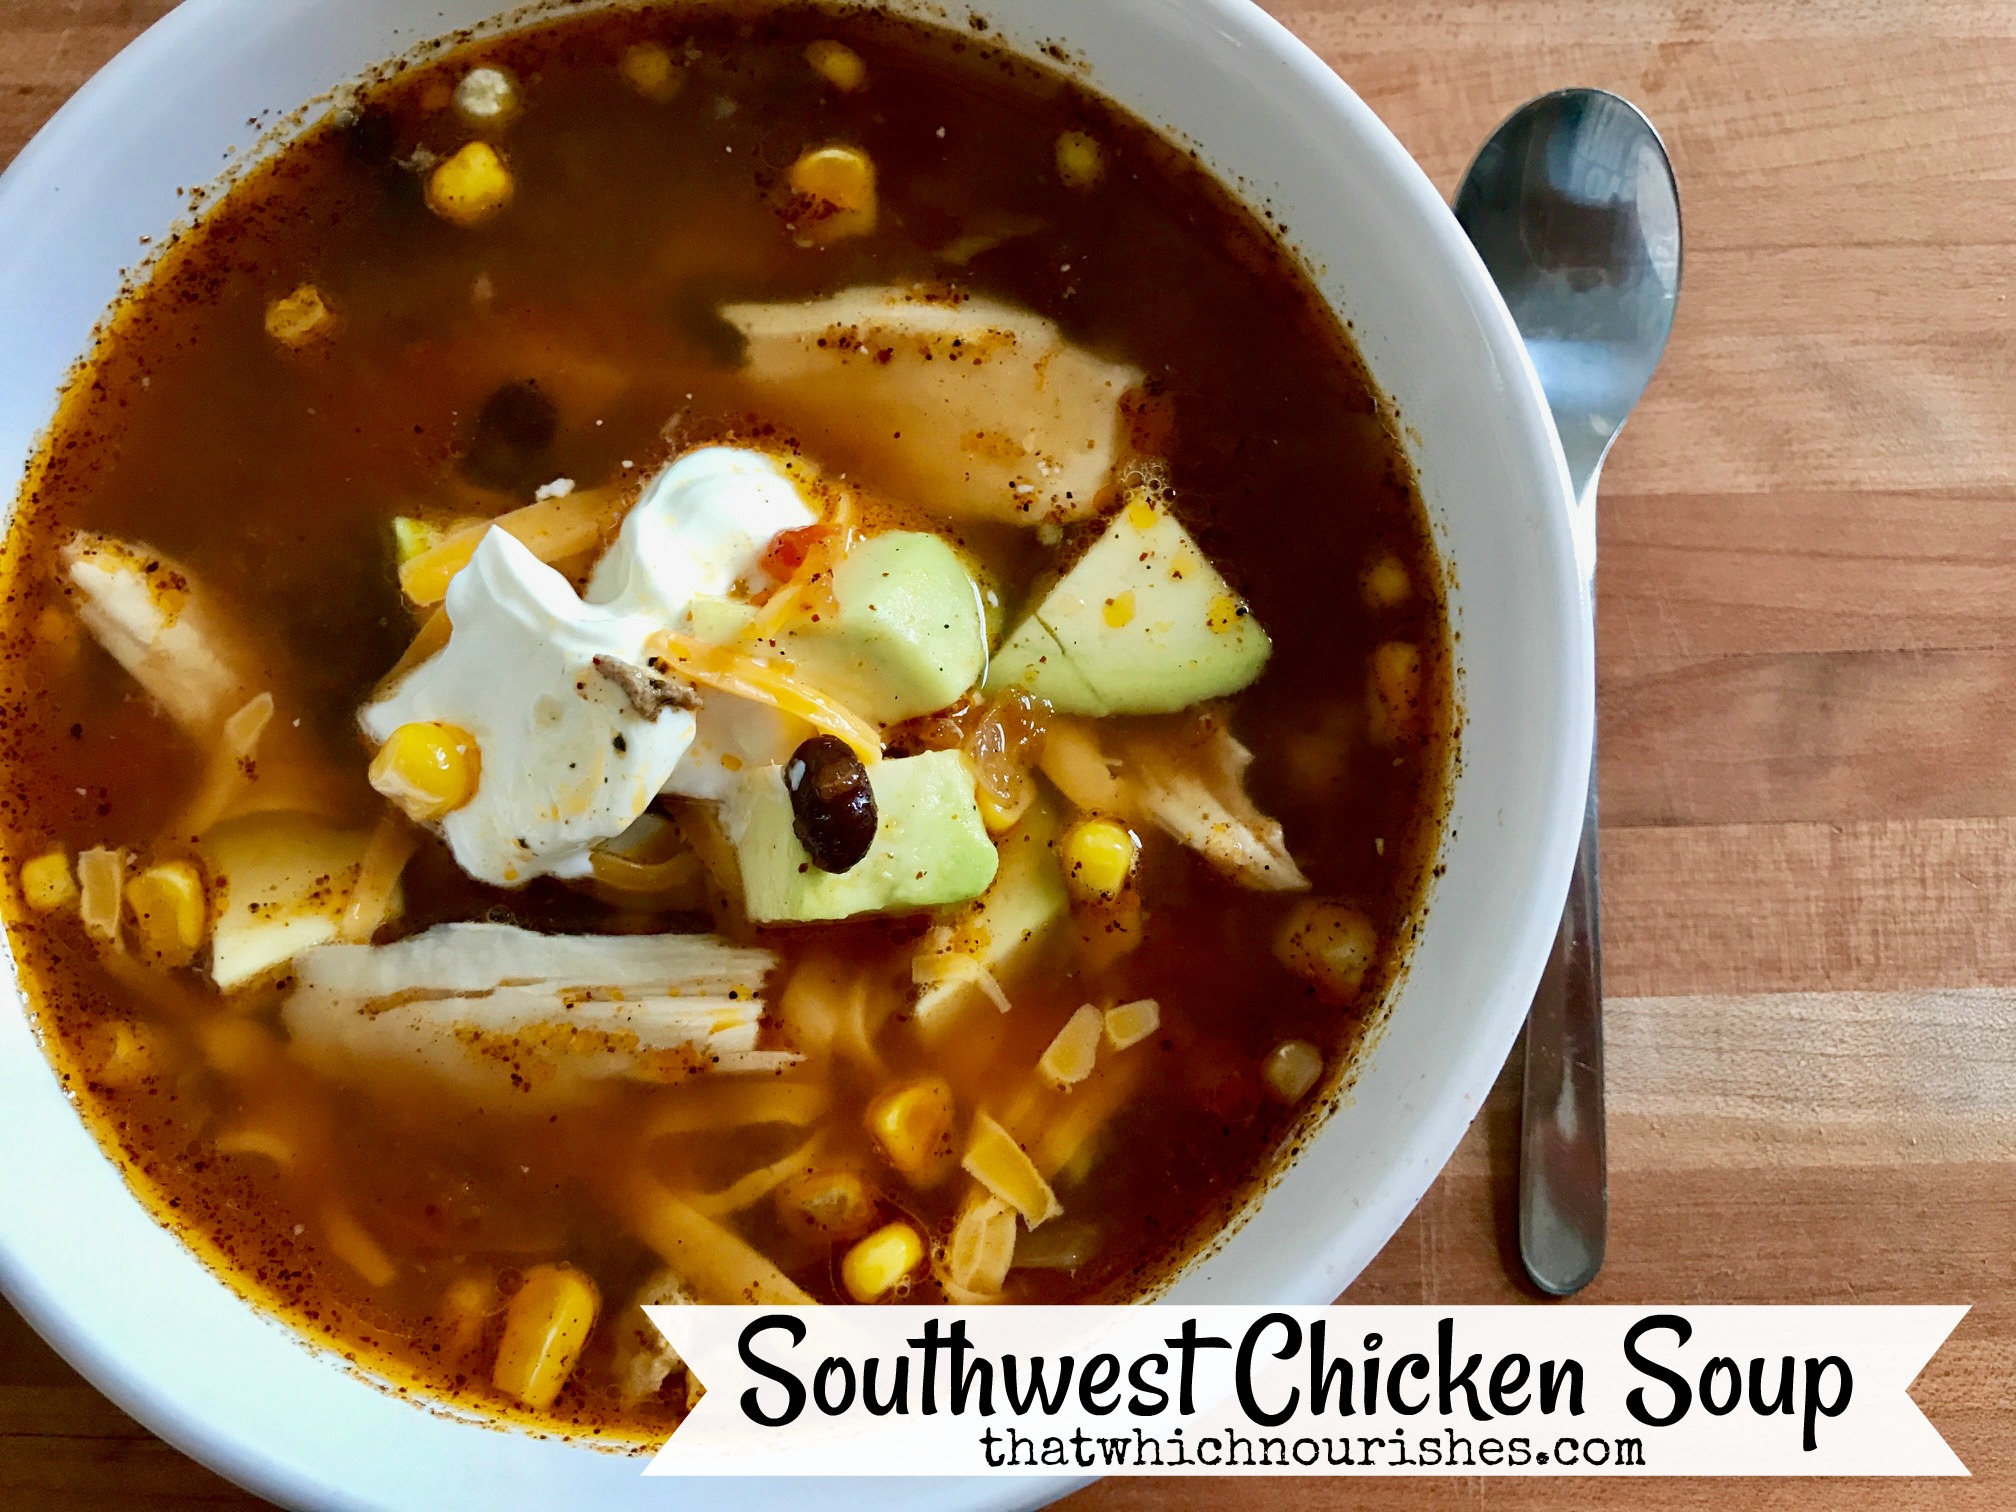 Southwest Chicken Soup -- All the nourishment of a rich chicken soup with all the flavors and spice of the Southwest, this Chicken Tortilla Soup is a hearty, nutritious meal. | thatwhichnourishes.com